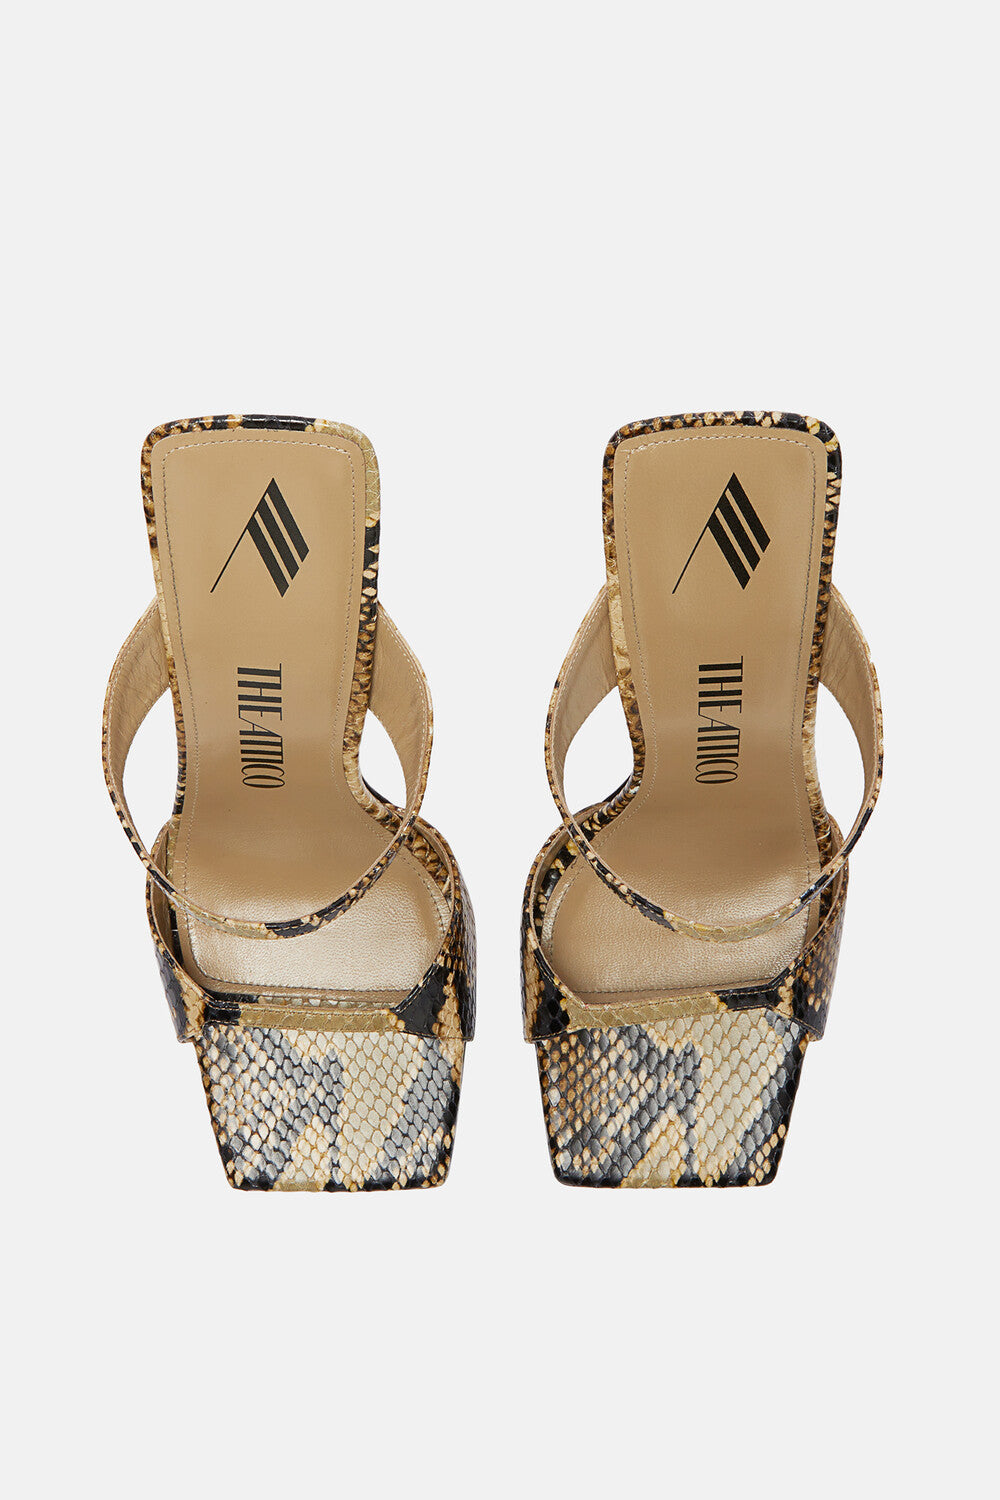 The Attico Adele Sandal available at The New Trend Australia.